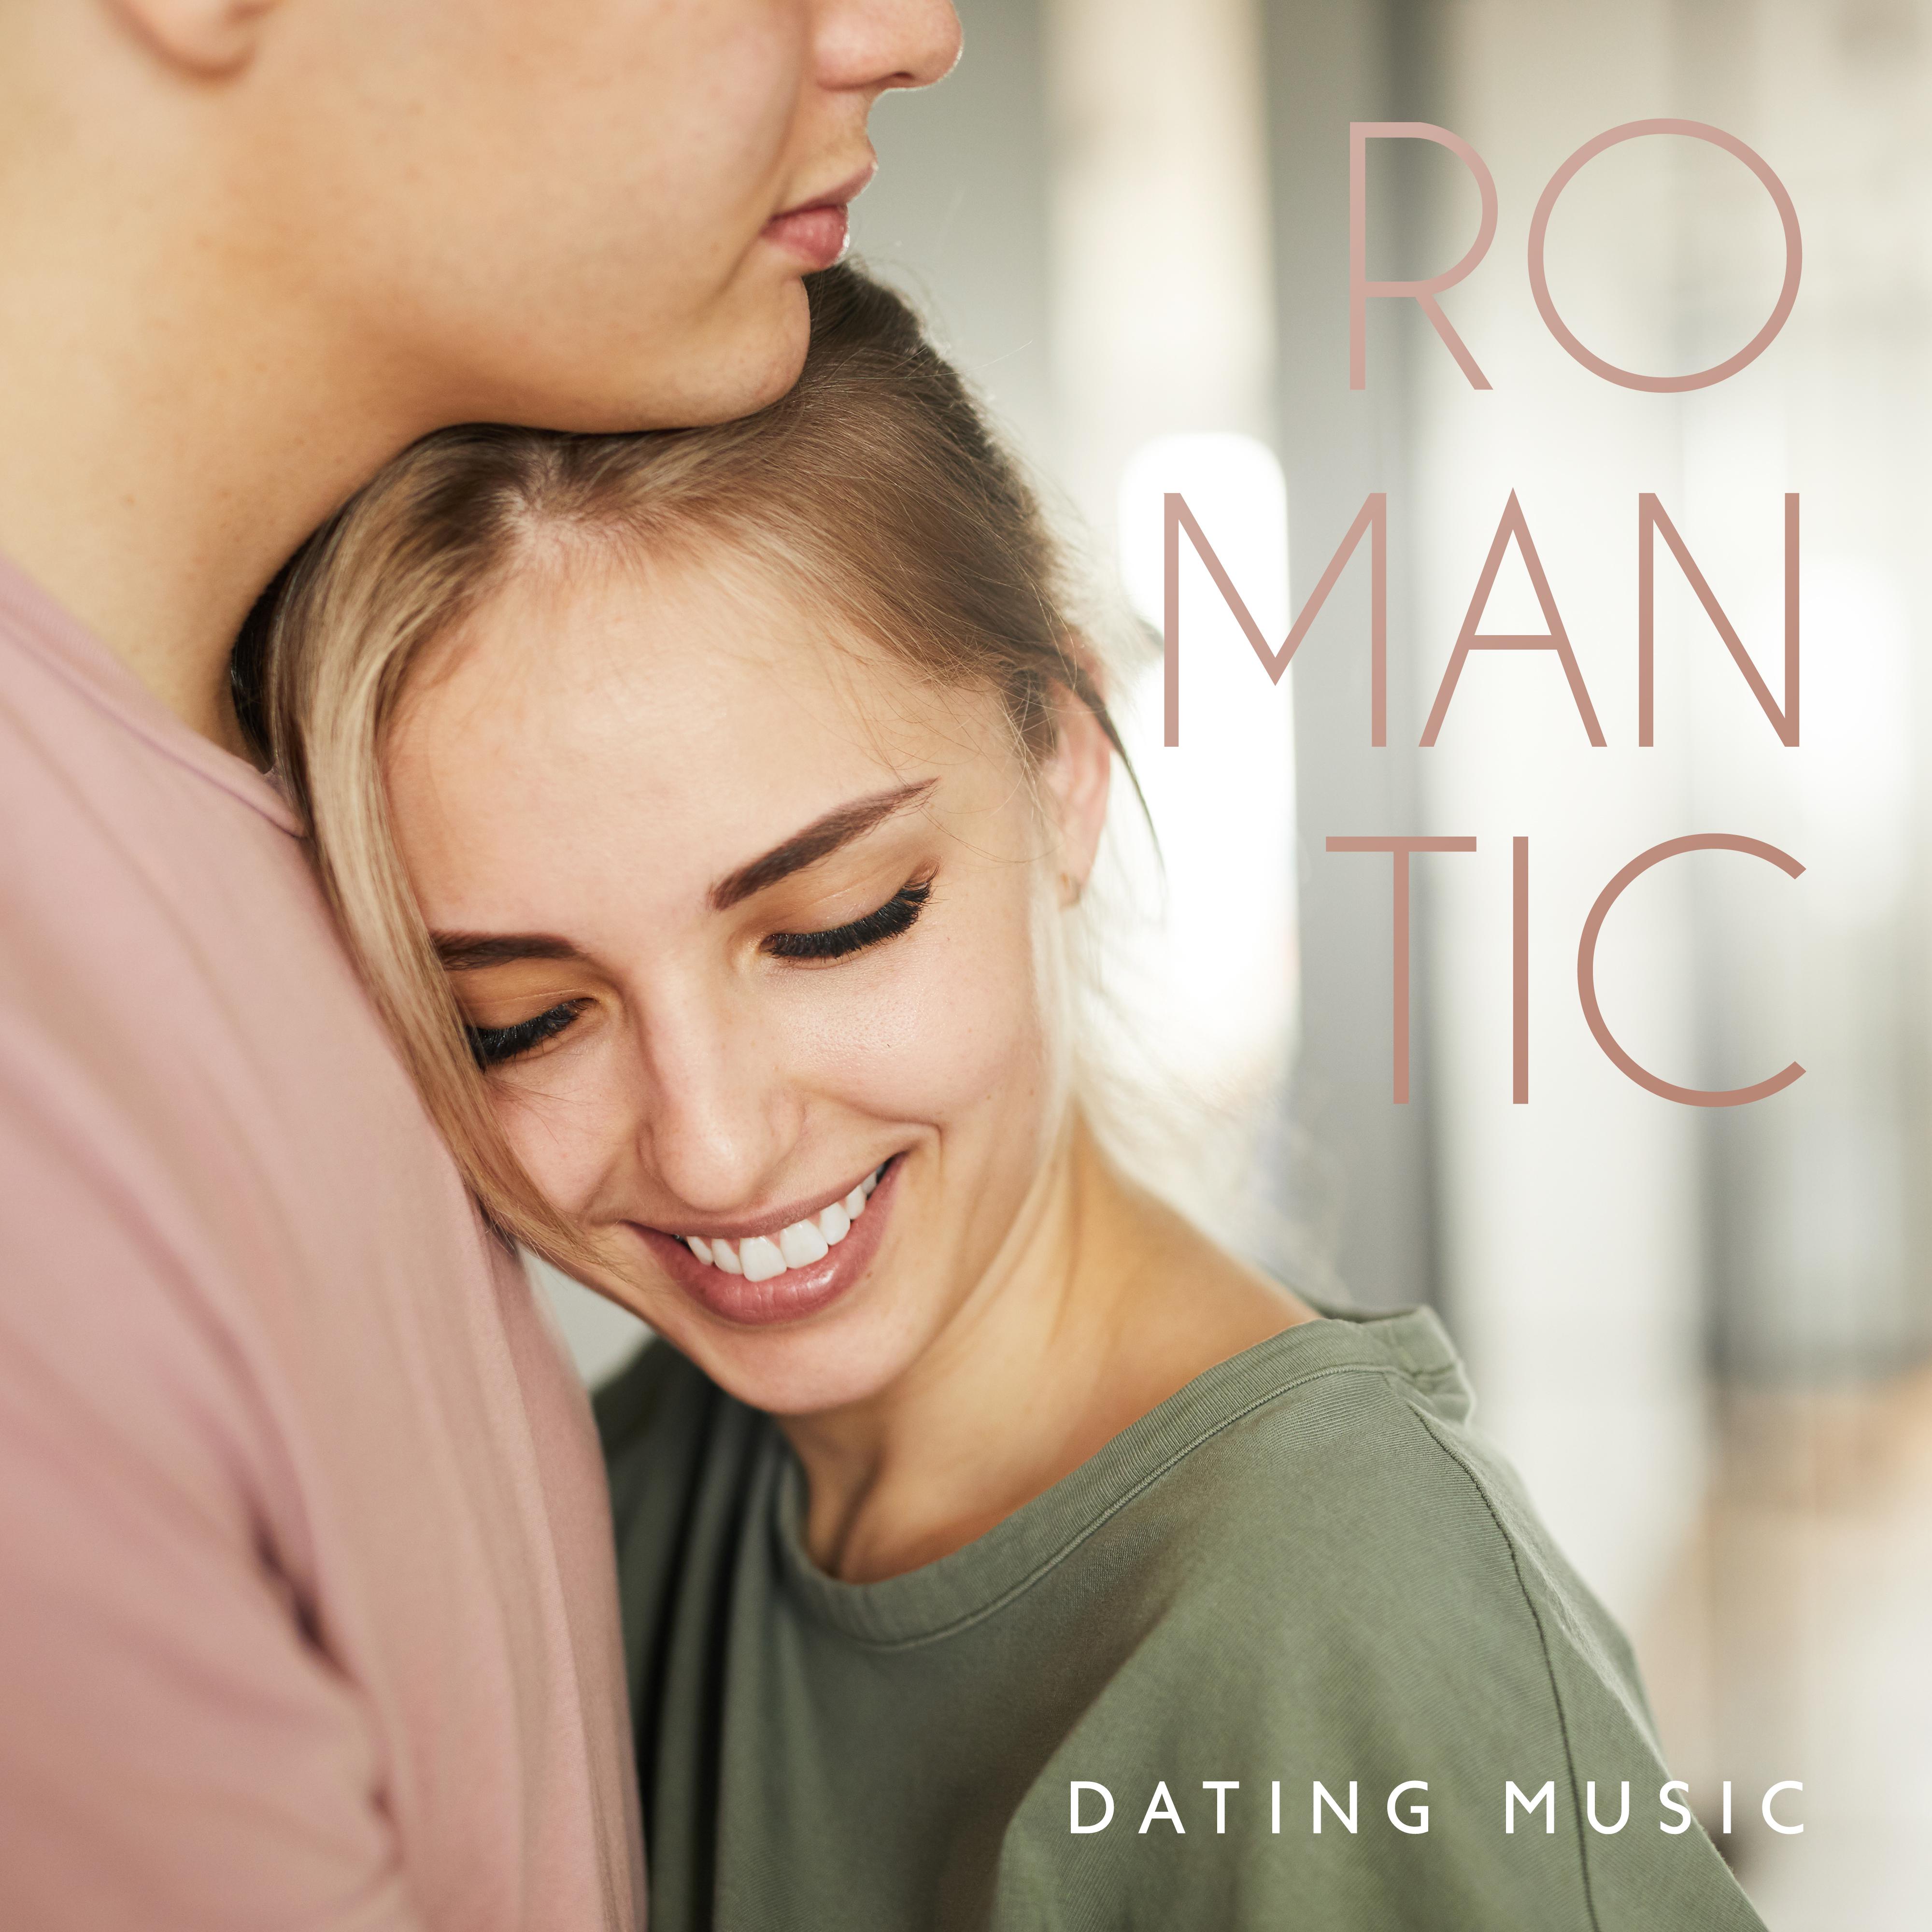 Romantic Dating Music: Best Instrumental Background Music for Successful Date, Romantic Dinner, Anniversary or Sensual Moments in the Bedroom